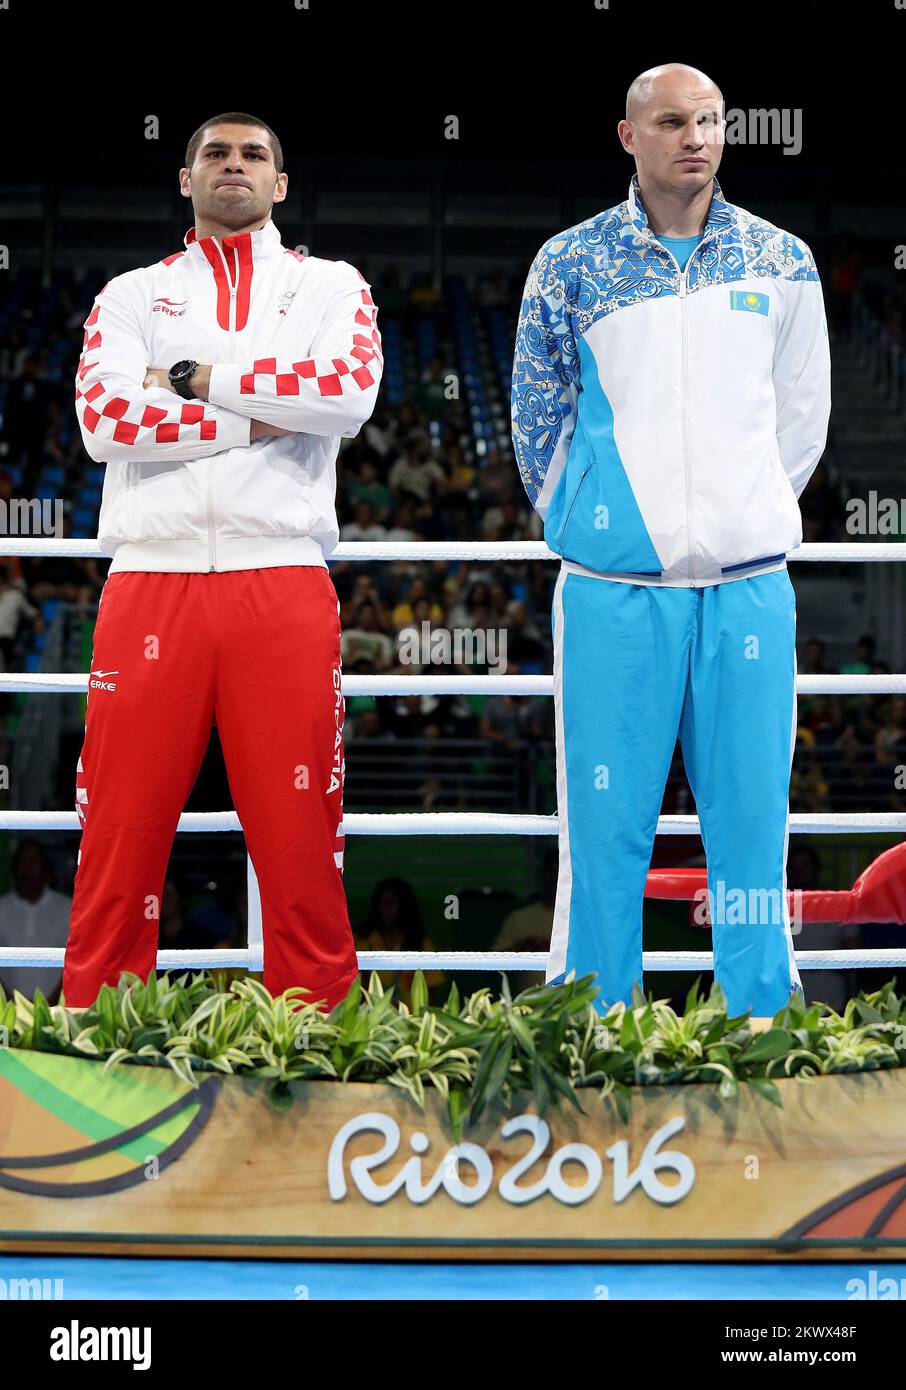 21.08.2016., Rio de Janeiro, Brazil - Bronze medalists Filip Hrgovic of Croatia and Ivan Dychko of Kazakhstan pose on the podium during the medal ceremony for the Men's Boxing Super Heavy +91kg.  Stock Photo